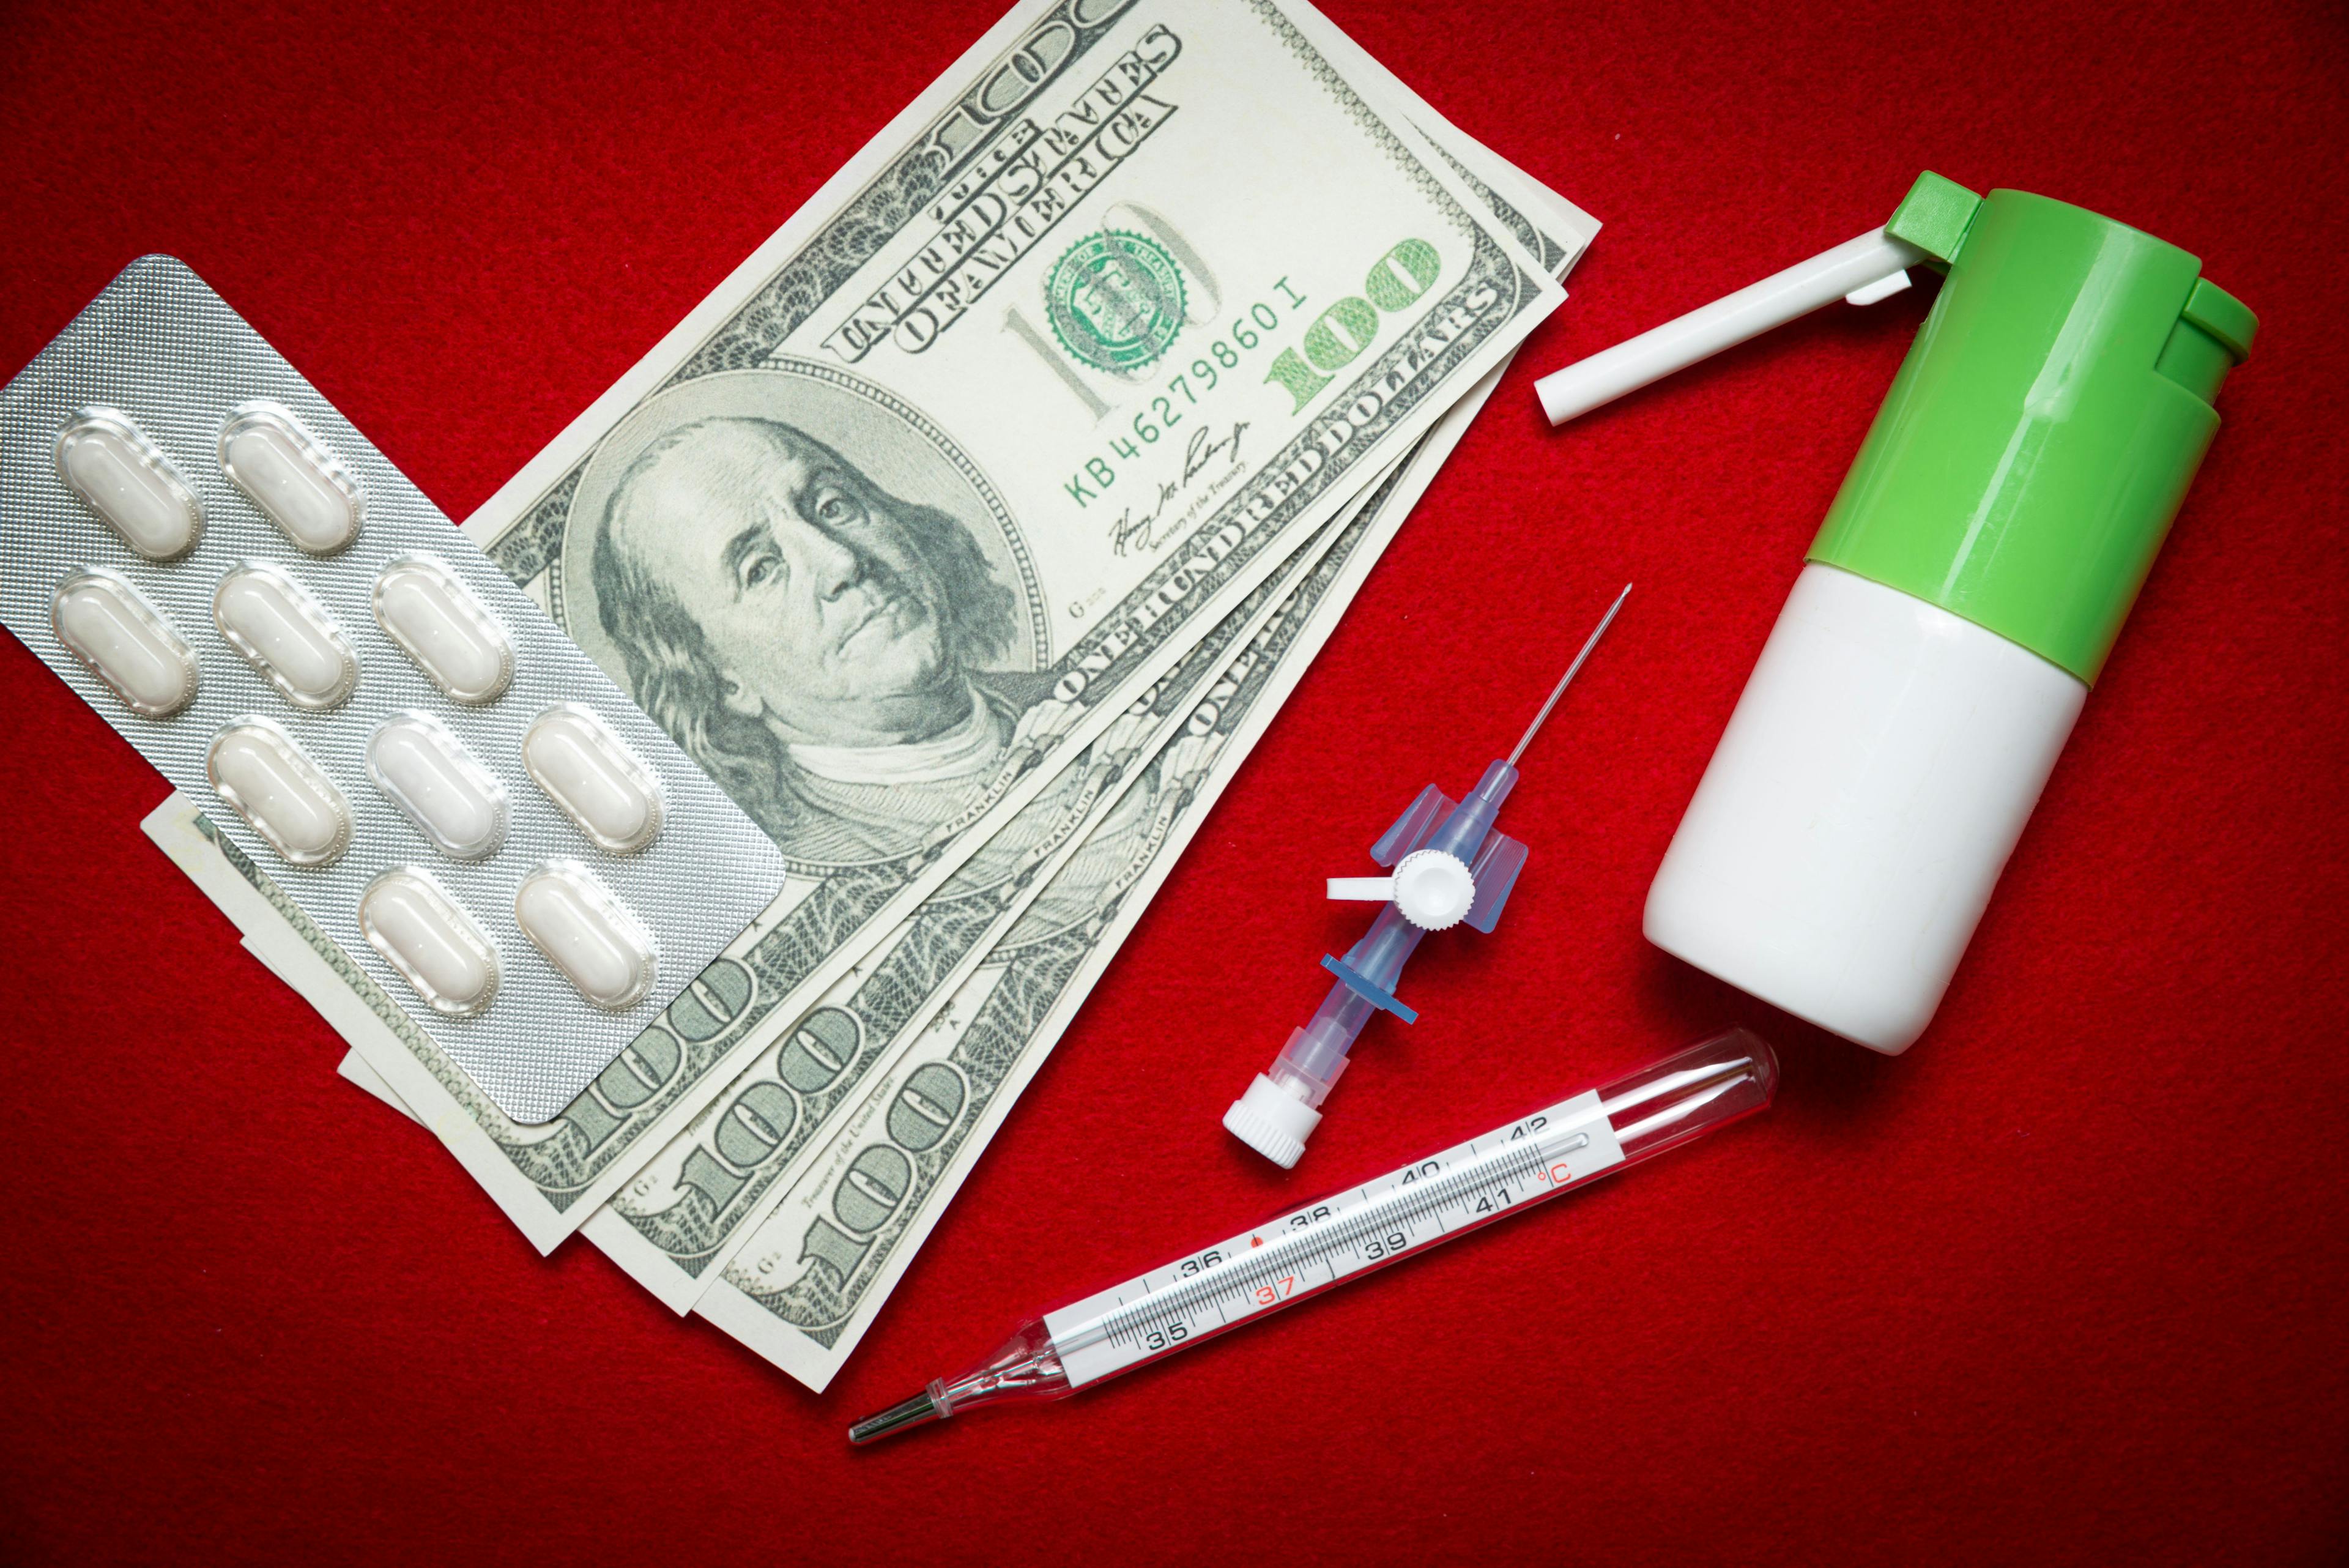 Pills, thermometer, inhaler and money on a red background | Sebastian - stock.adobe.com